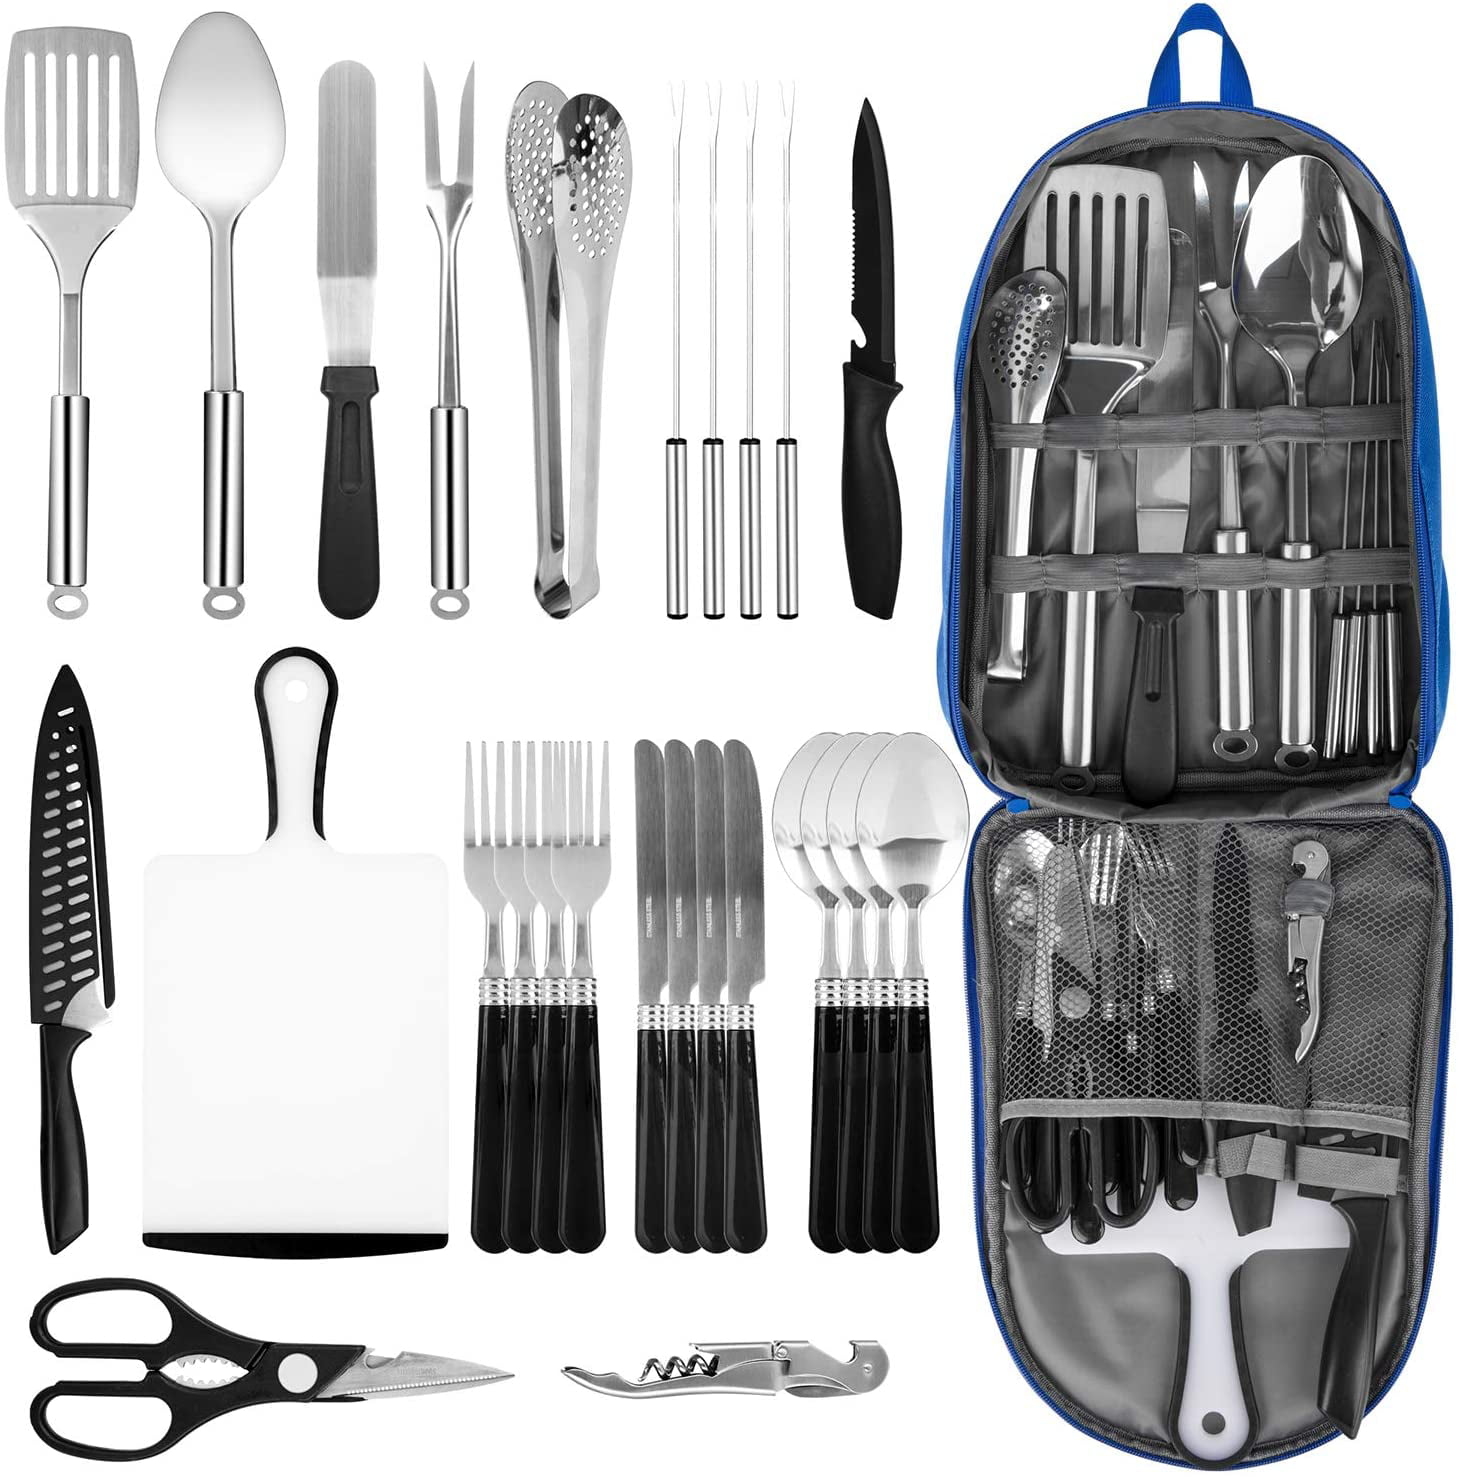 Parties BBQs Potlucks and More Camping Oaoleer Camping Cookware Camp Kitchen Utensil，16-Piece Stainless Steel Outdoor Cooking and Grilling Utensil Organizer Travel Set Perfect for Travel